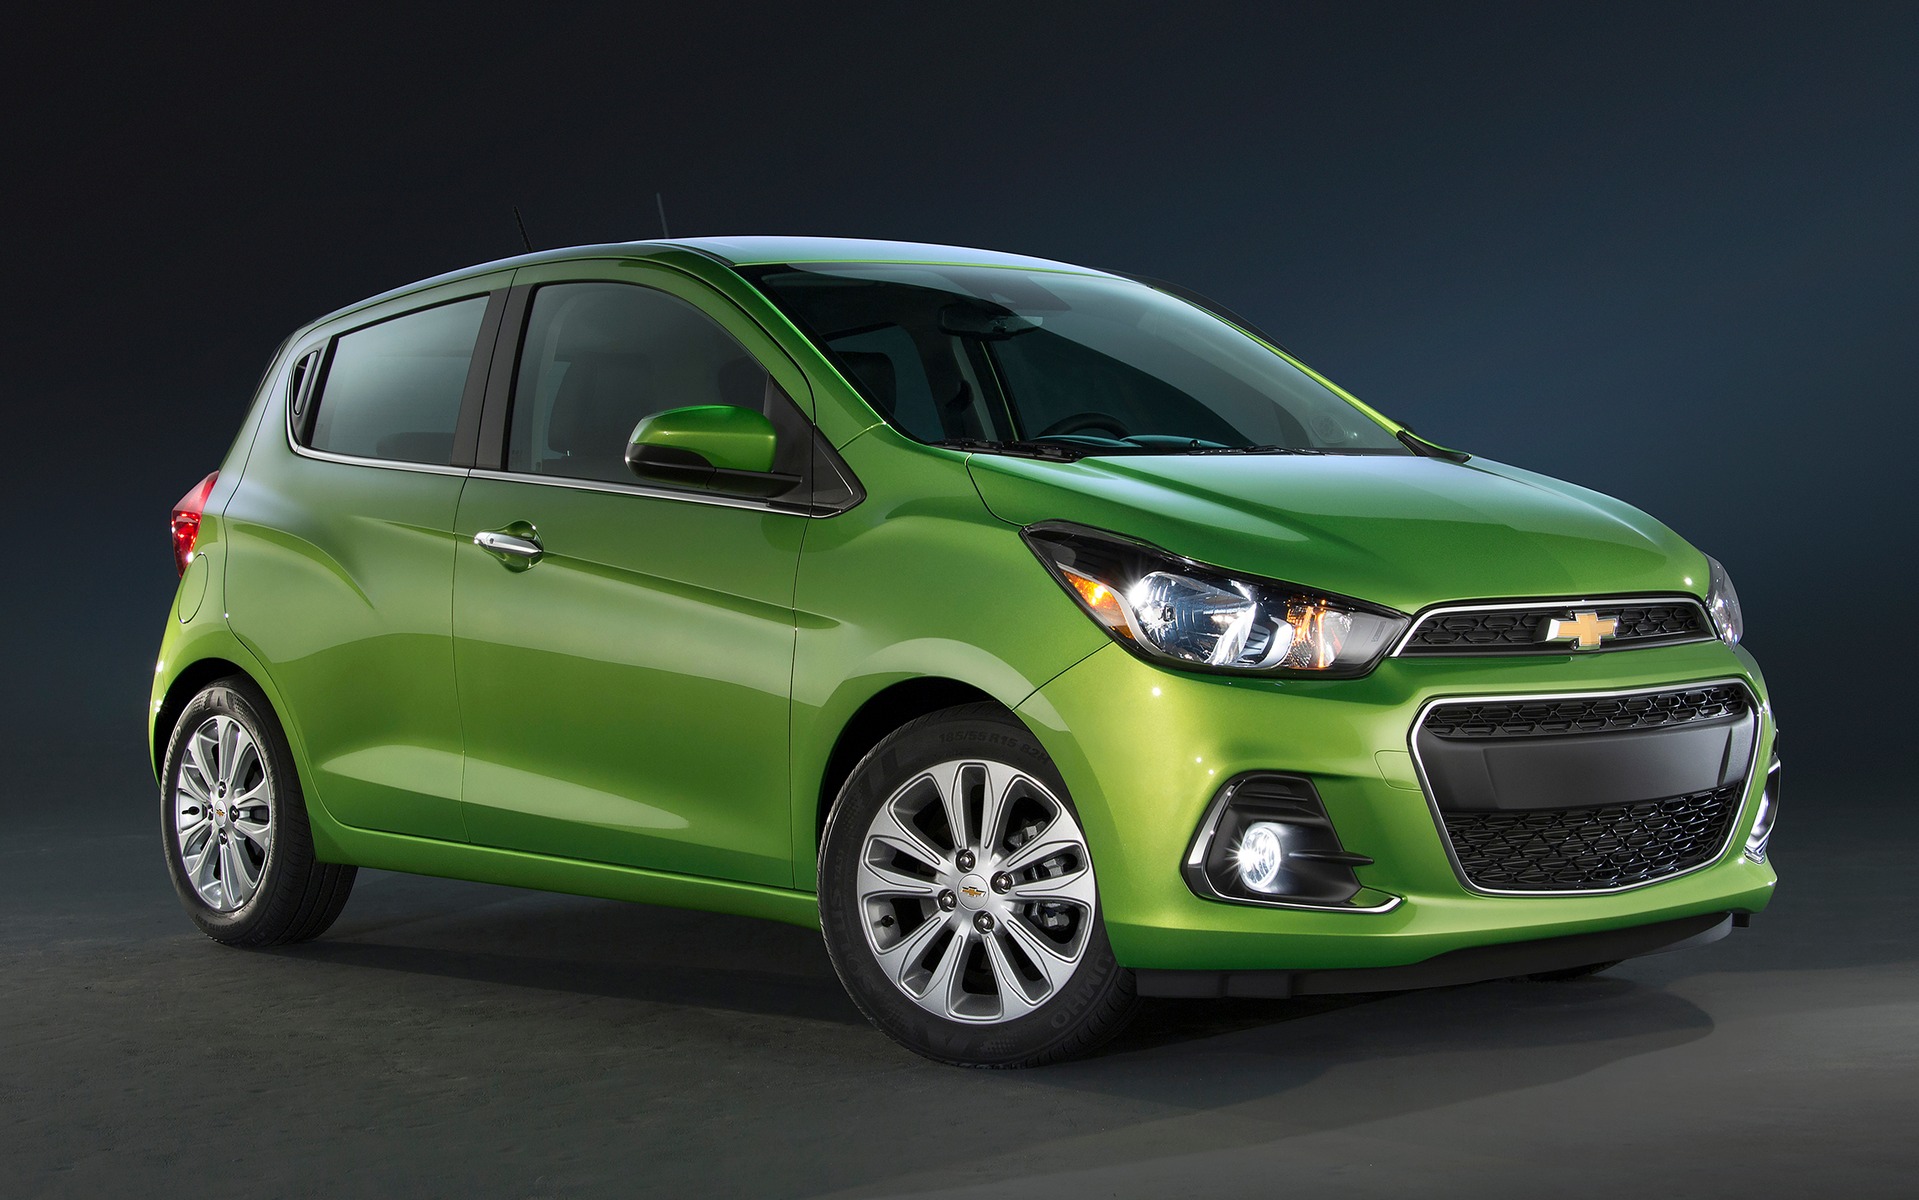 Chevrolet Spark / 2020 Chevrolet Spark Review, Pricing, and Specs